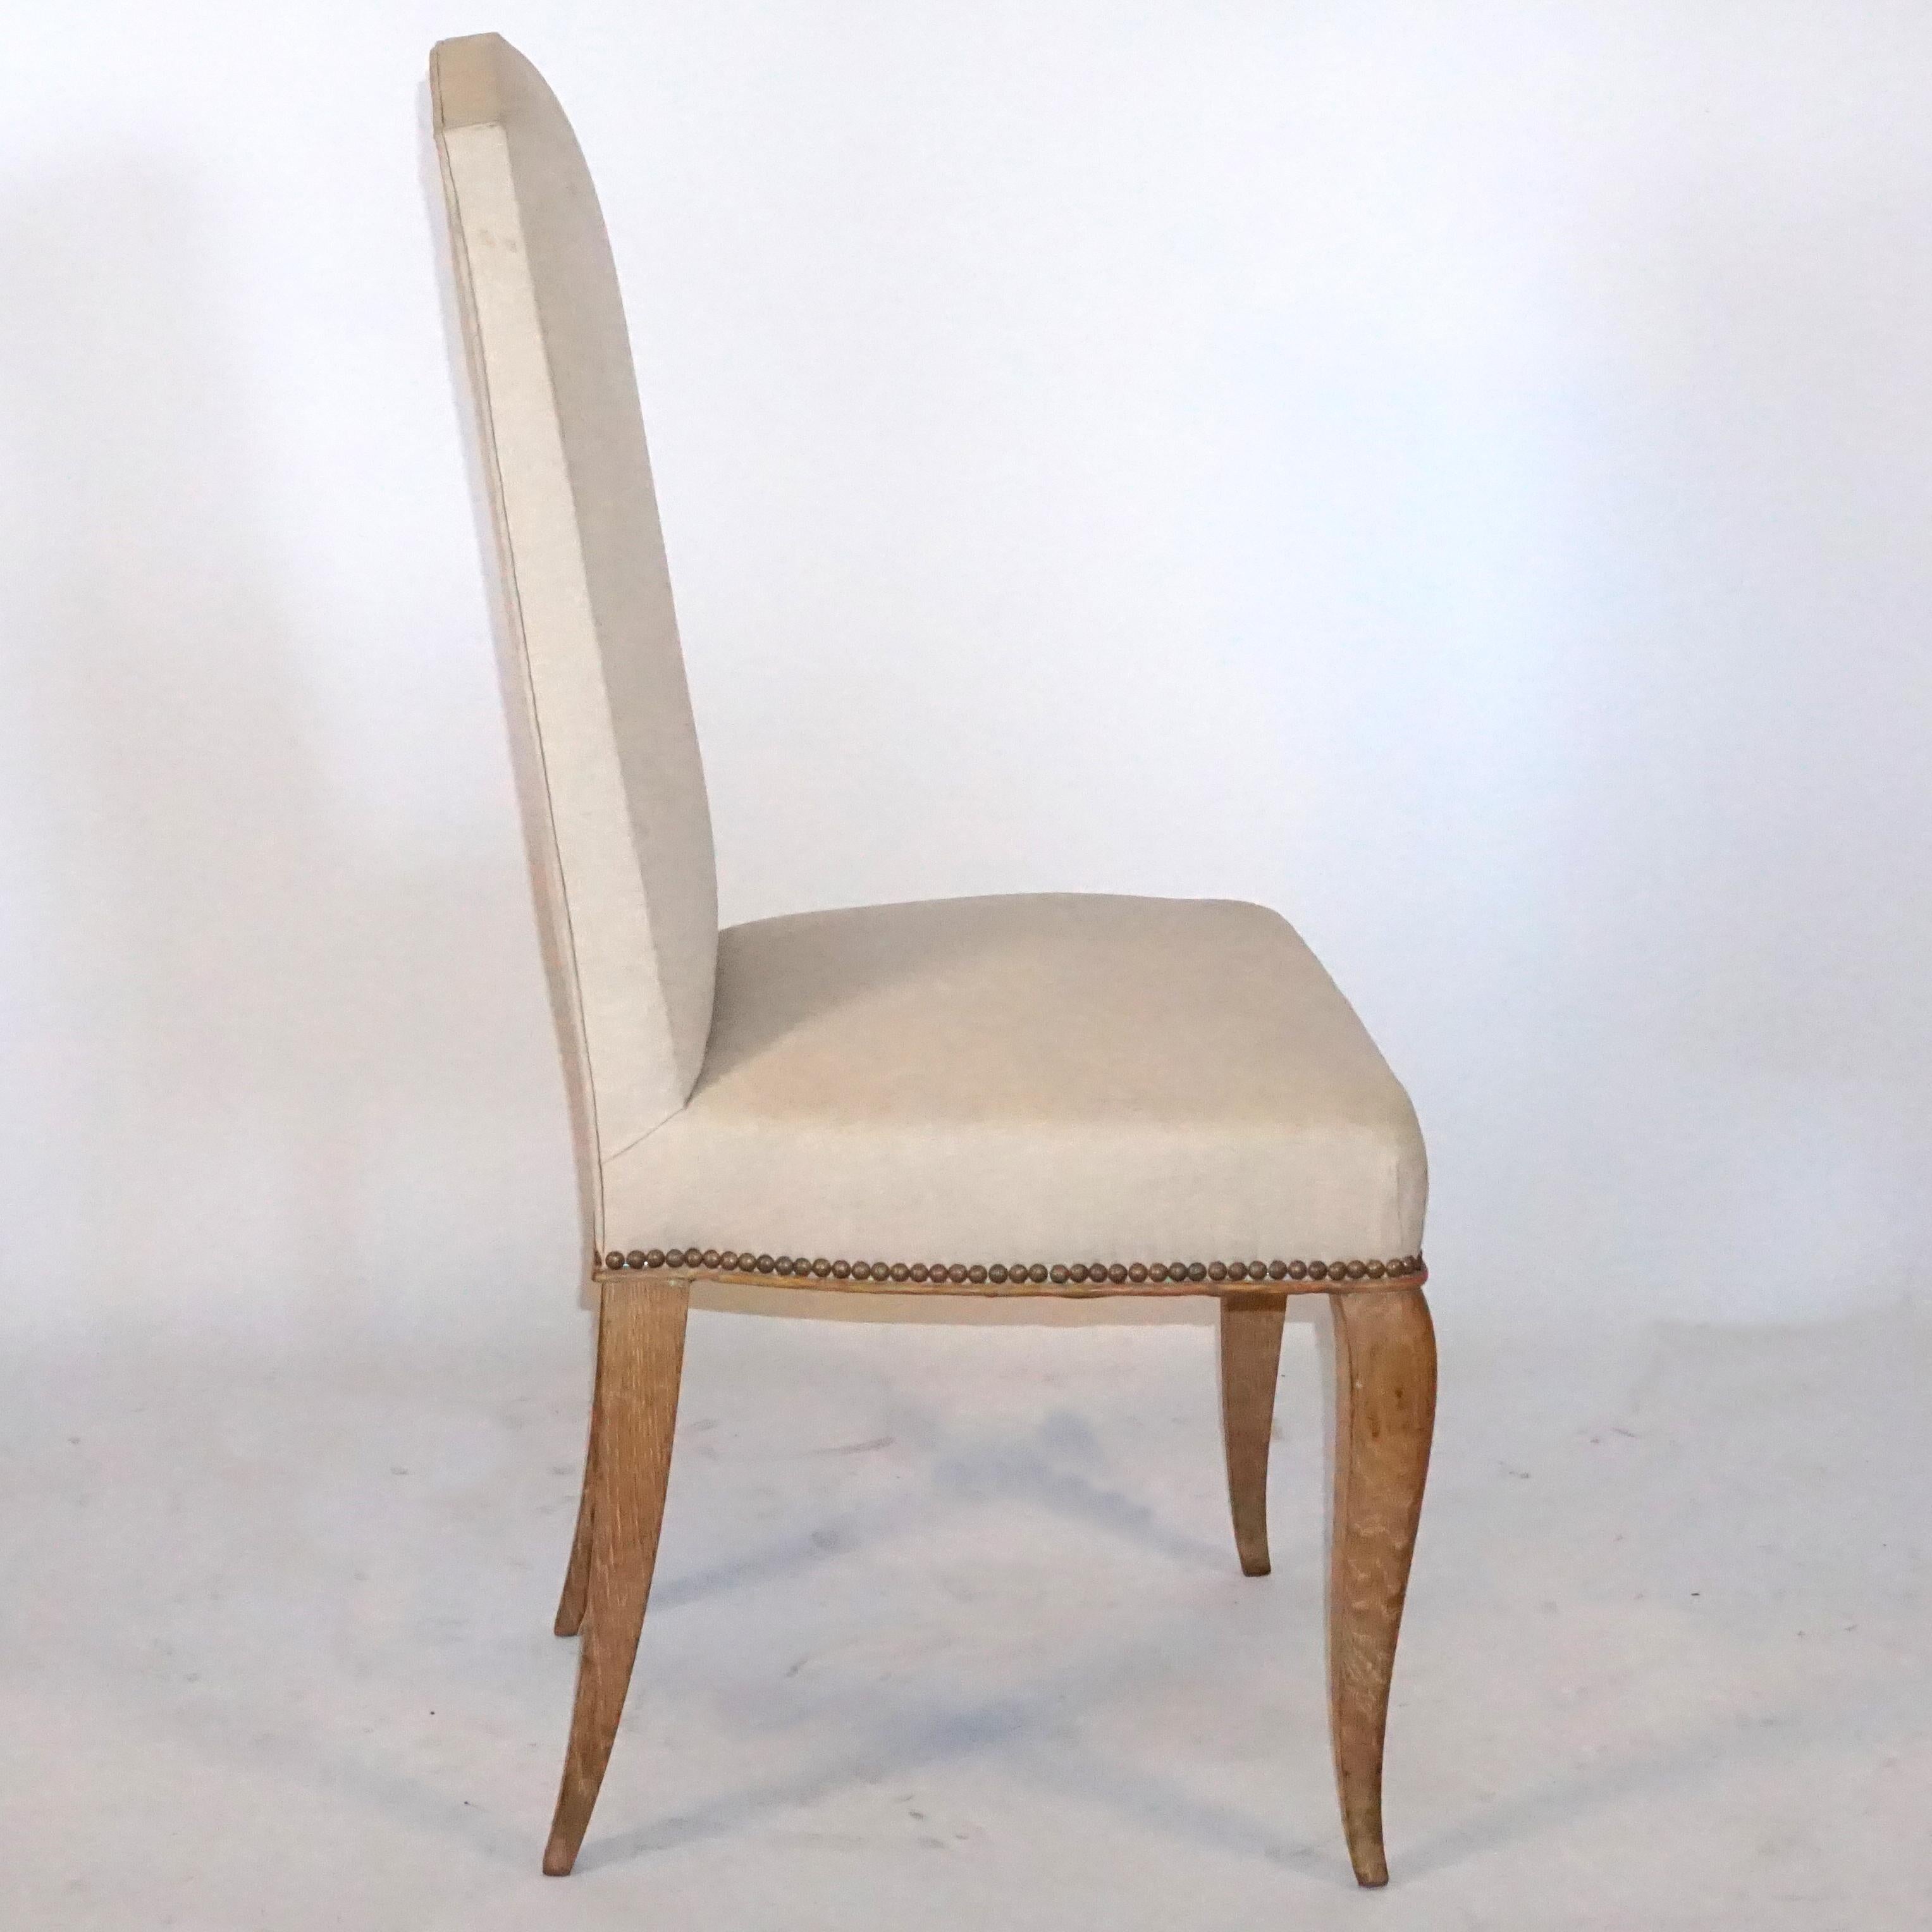 A set of six French reused oak dining chairs, with high backrest recovered in velvet fabric.

Measures: Seat 18.5” H